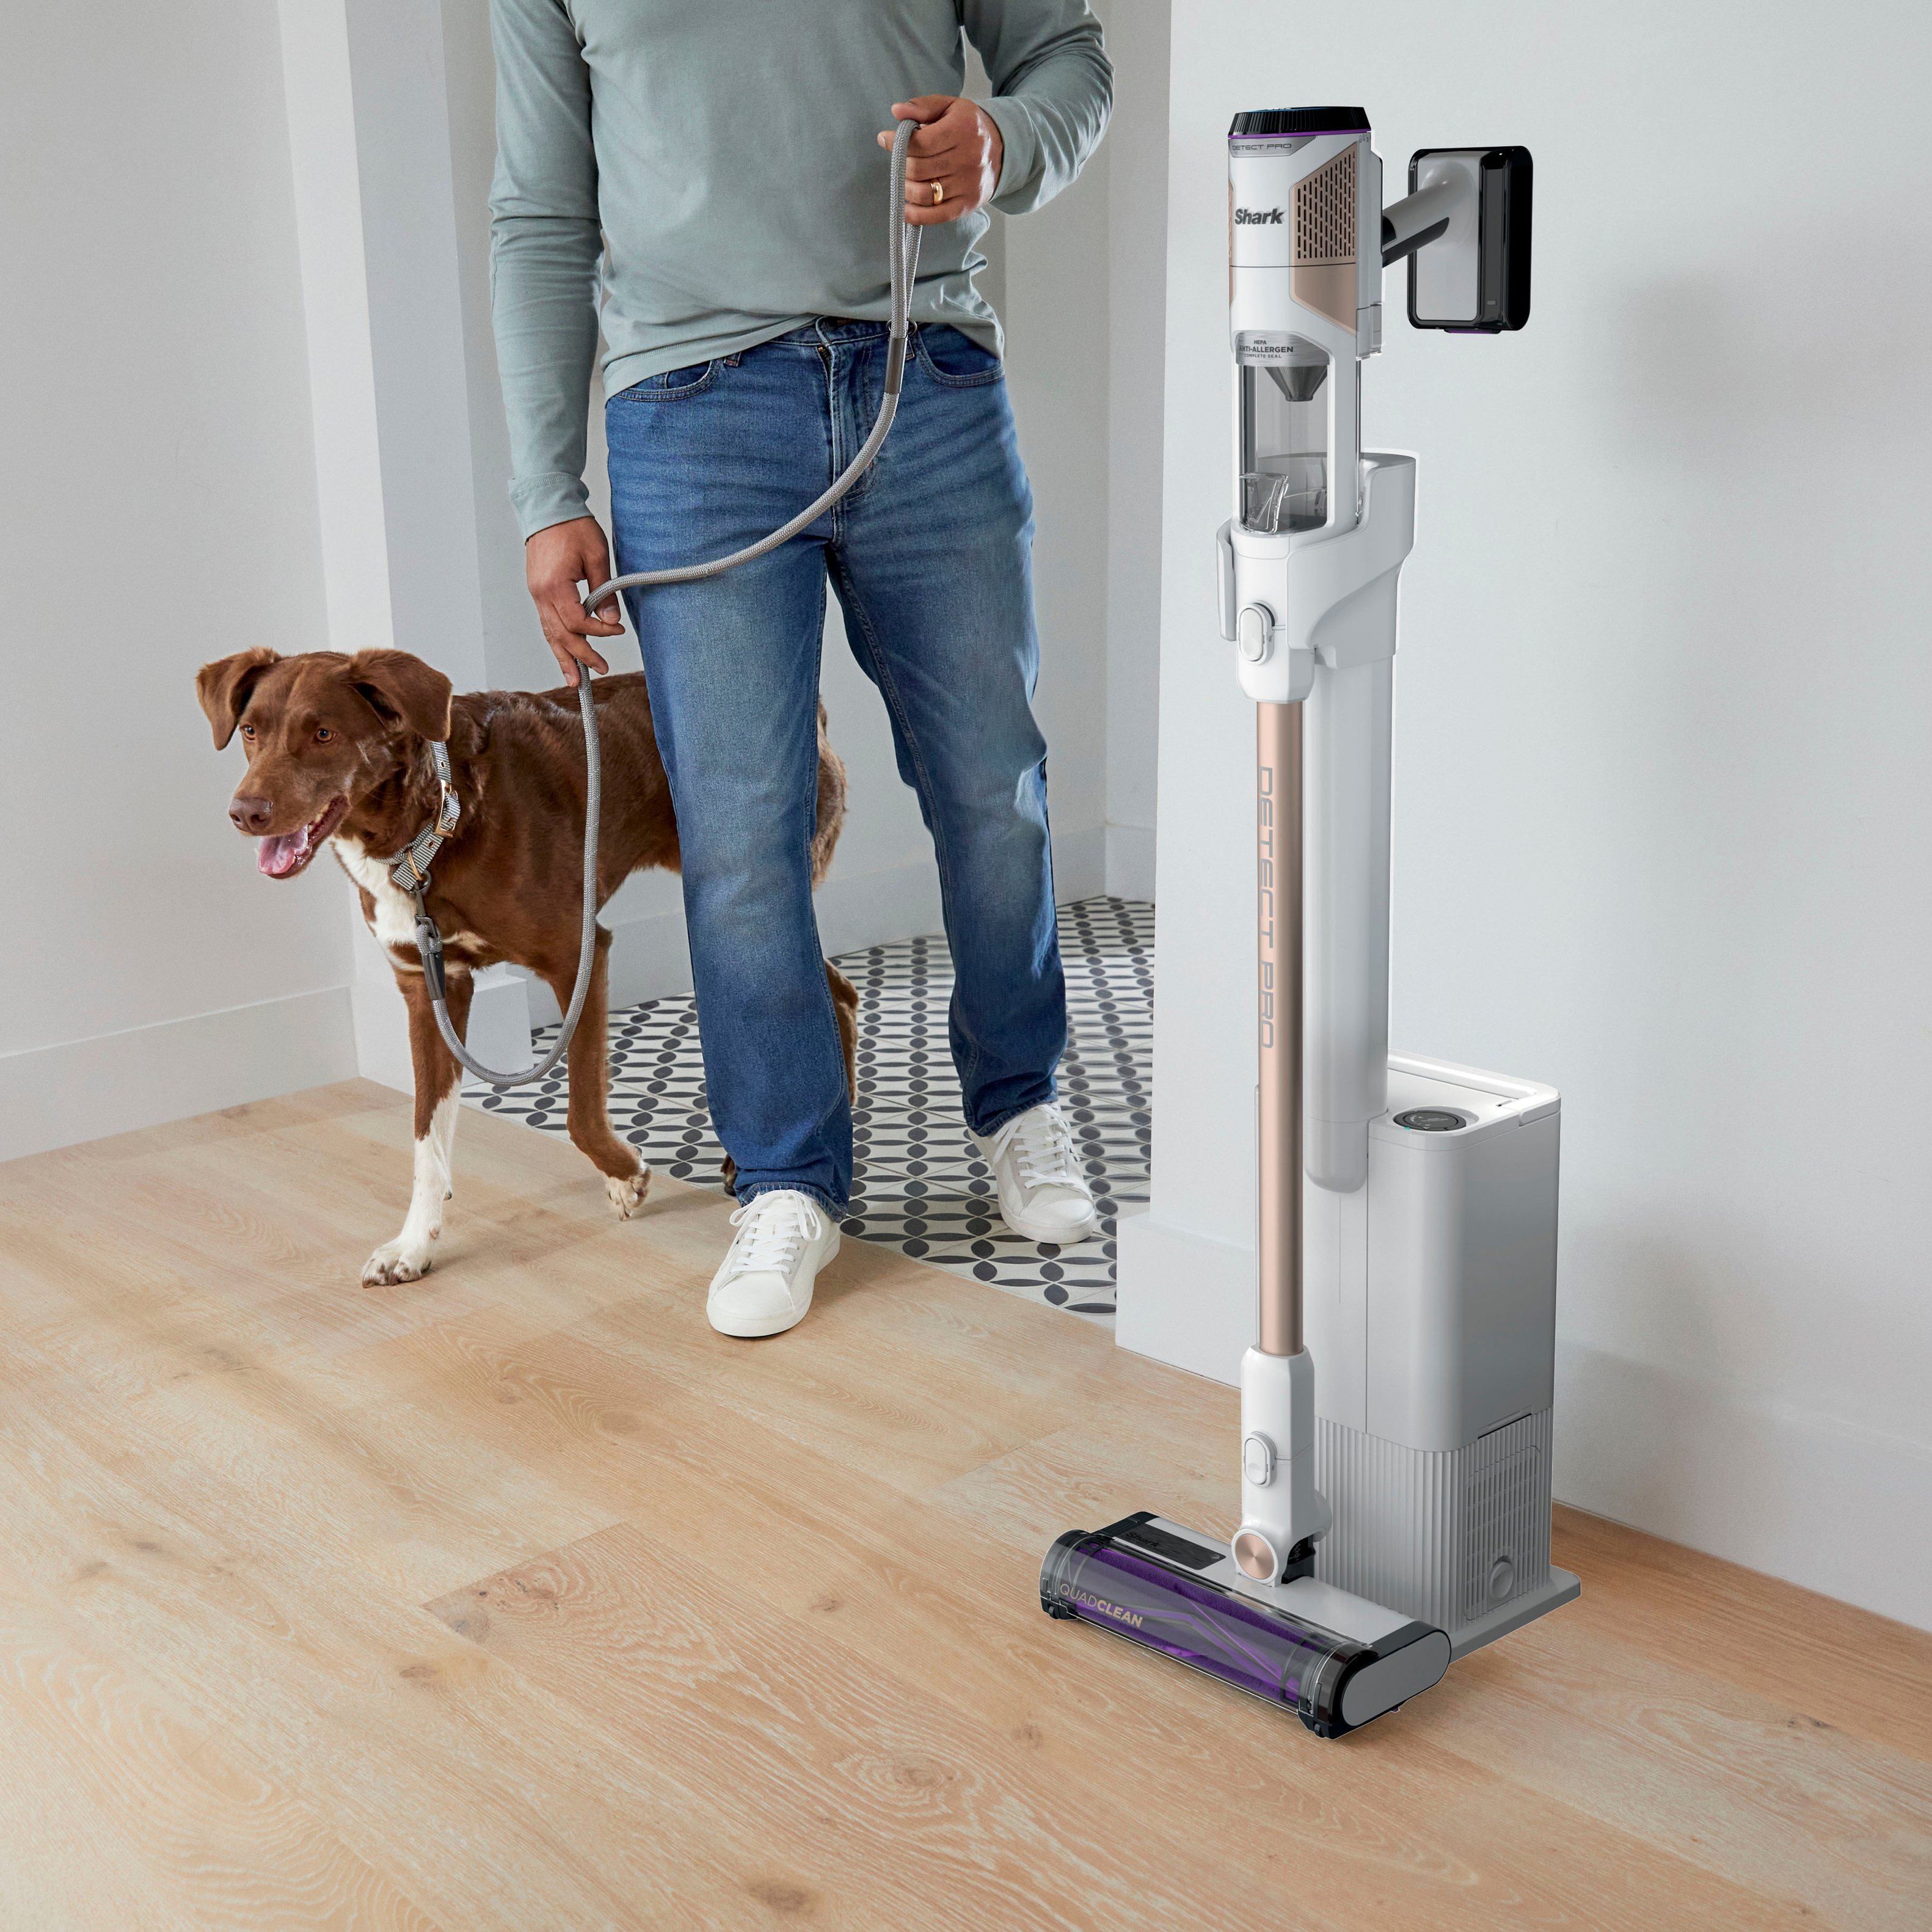 Shark Detect Pro Auto-Empty System, Cordless Vacuum with QuadClean  Multi-Surface Brushroll, HEPA Filter & 60-Minute Runtime White/Beats Brass  IW3511 